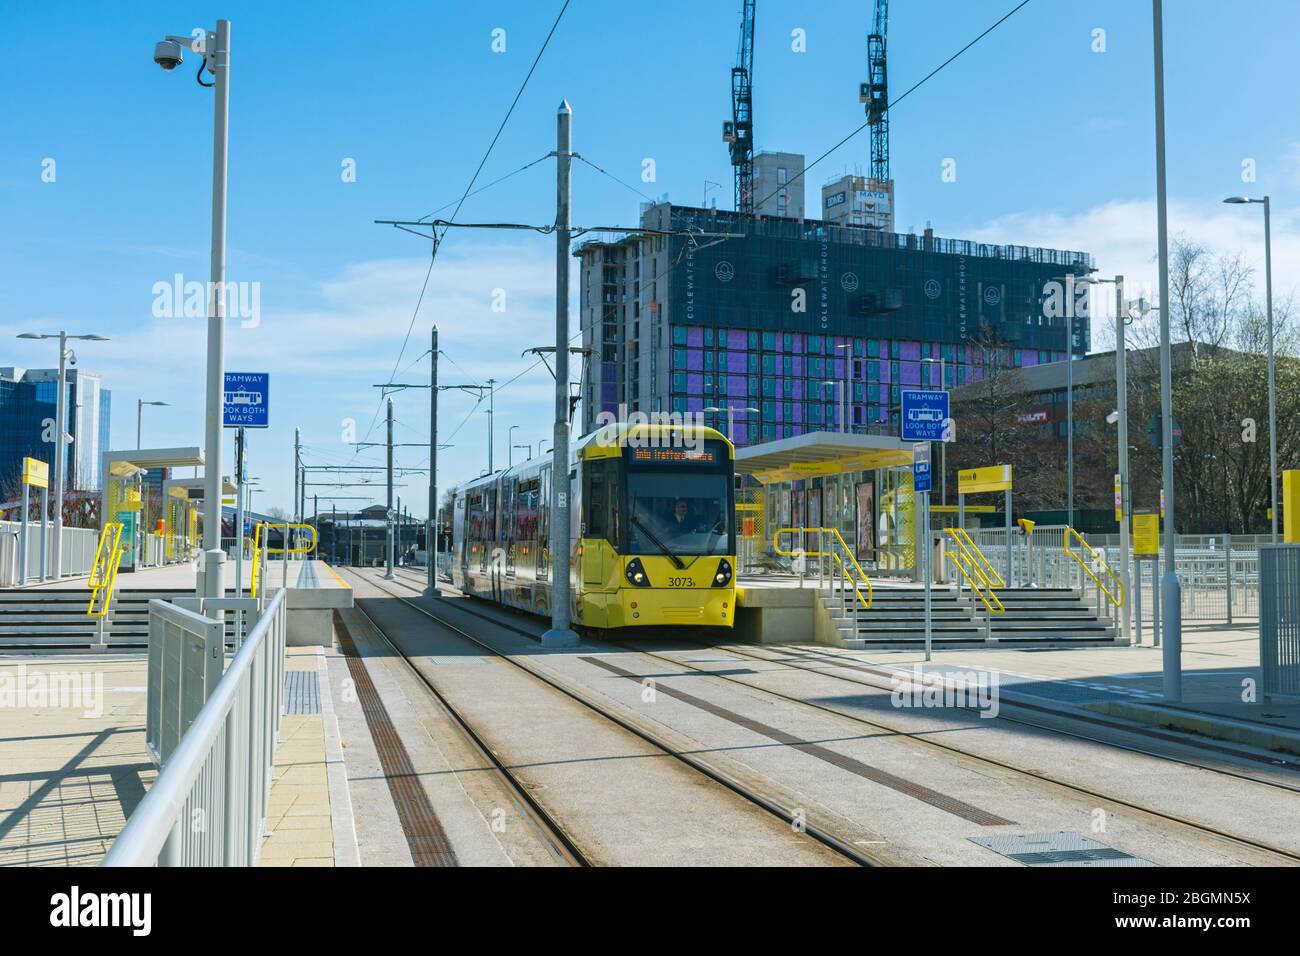 Metrolink tram at the Wharfside stop on the opening day of the Trafford Park Line, 22 March 2020.  Wharfside, Old Trafford, Manchester, UK Stock Photo